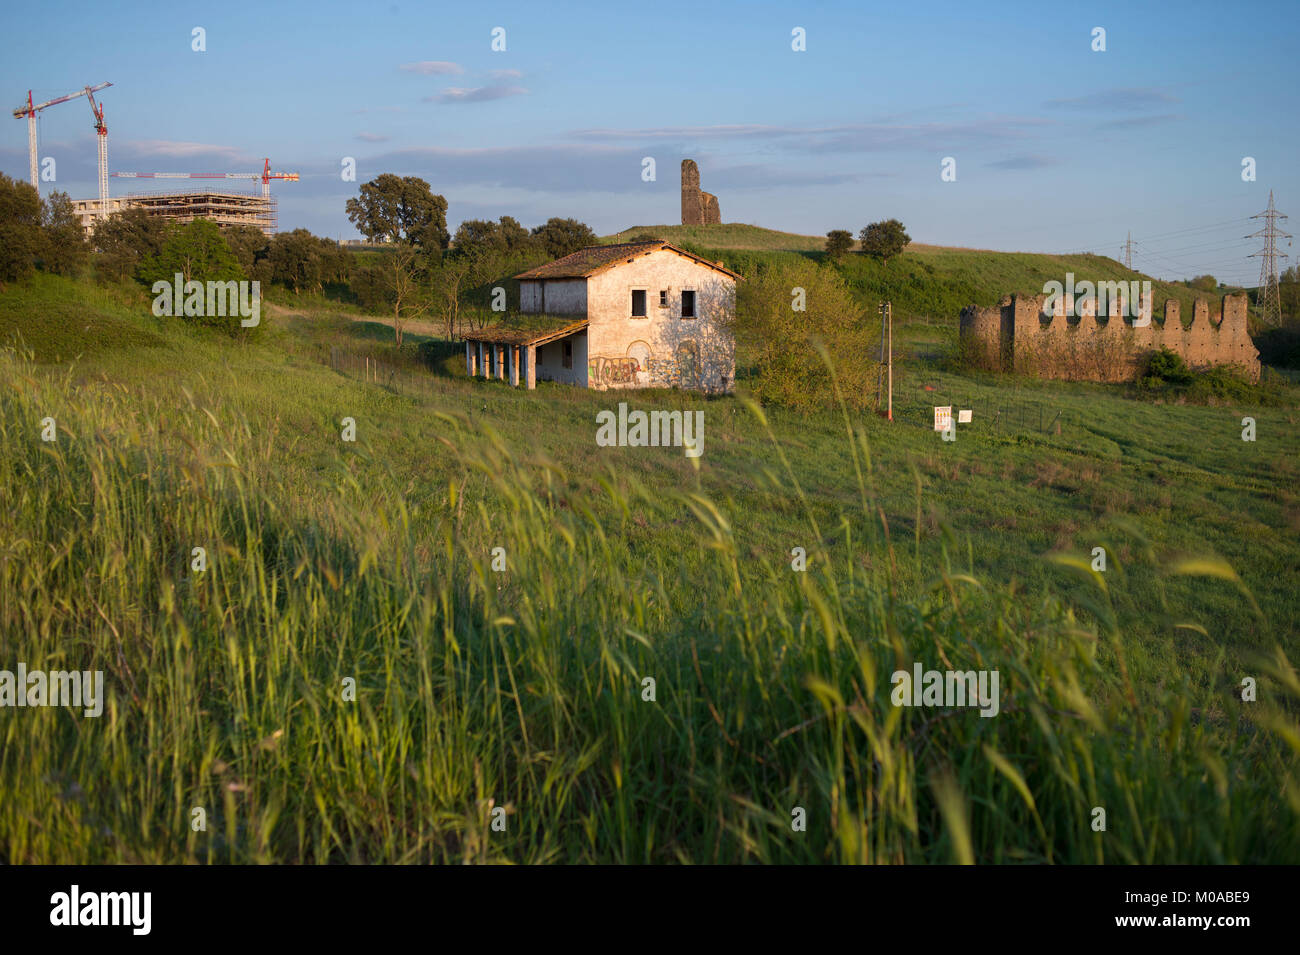 Rome, Italy. Old abandoned country house, ancient medieval ruins and heavy construction in the background, South outskirts of town. Stock Photo